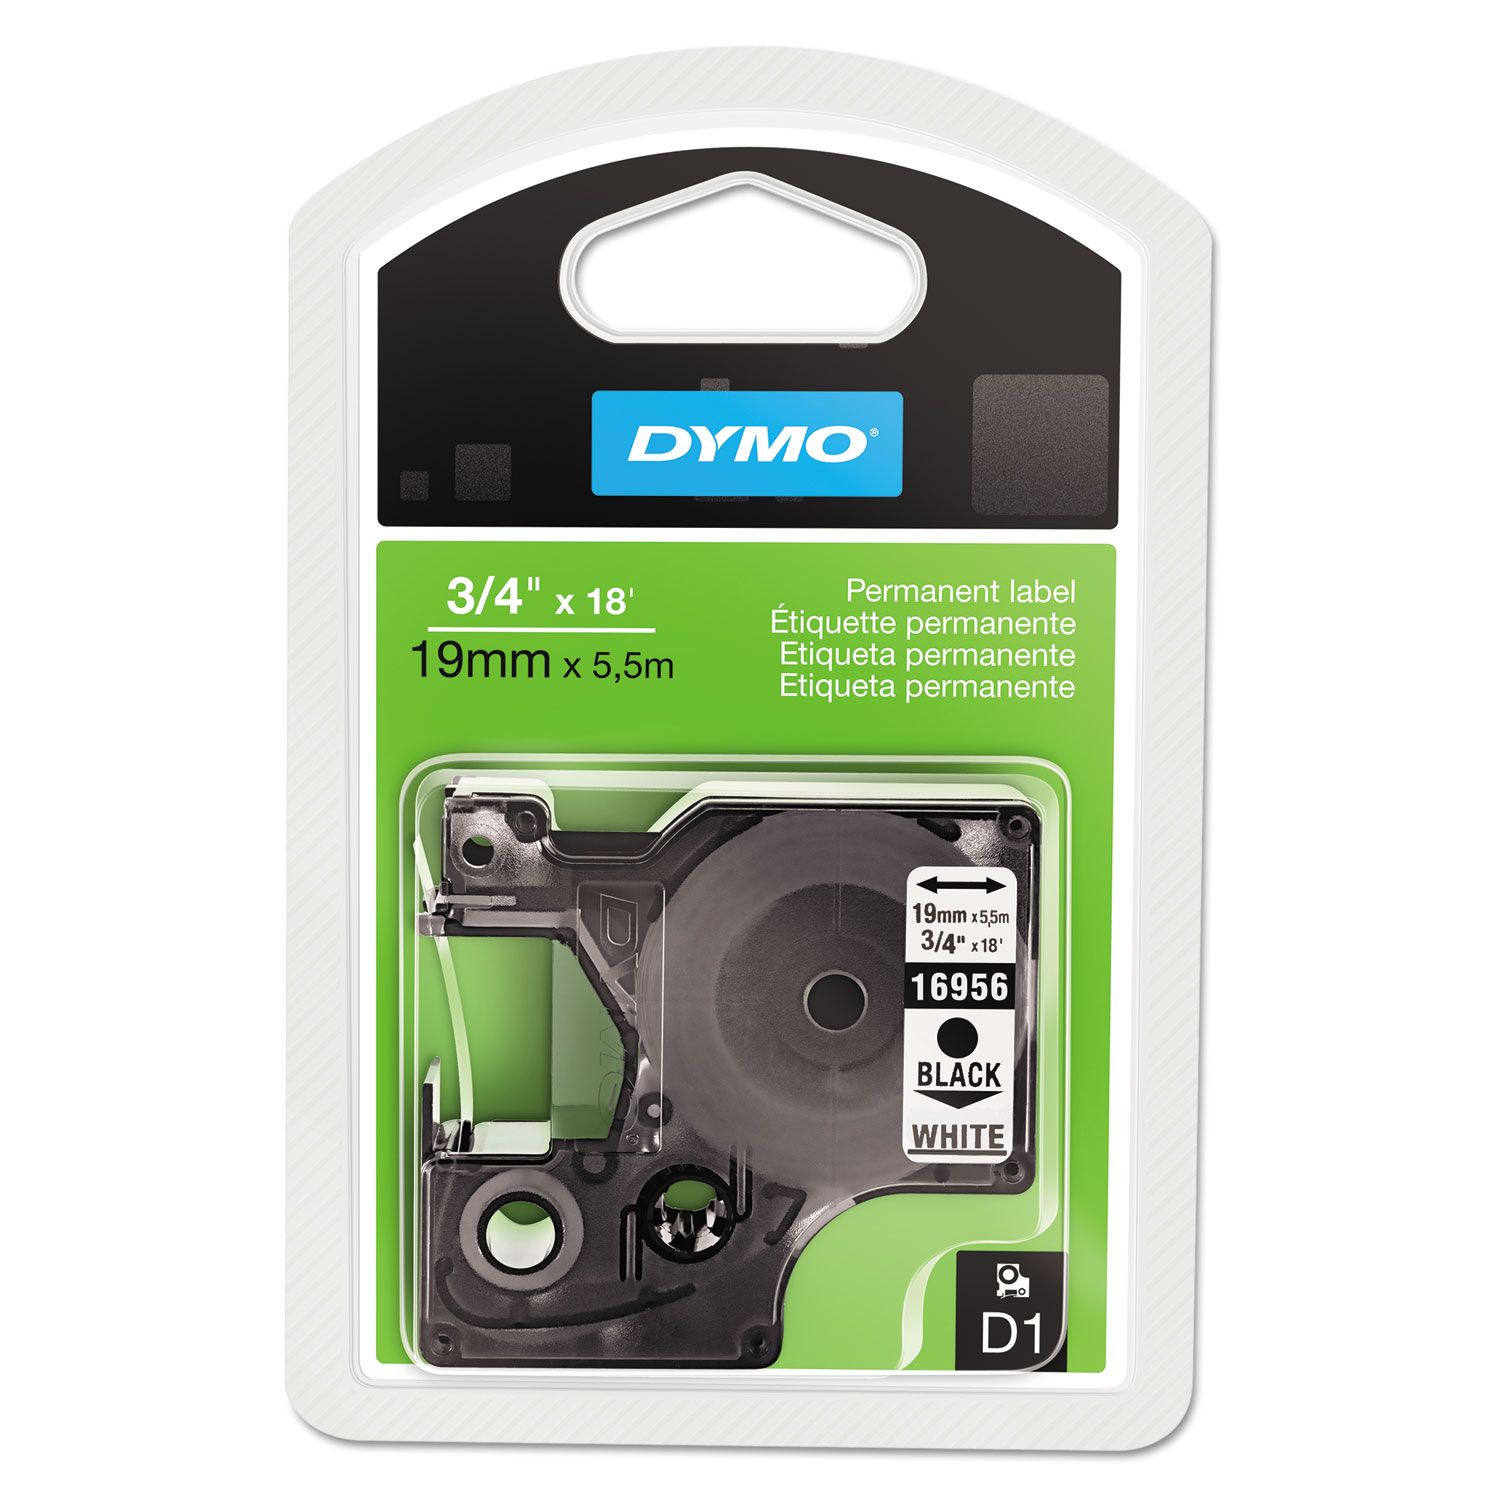  DYMO 16956 D1 High-Performance Polyester Permanent Label Tape, 0.75 x 18 ft, Black on White (DYM16956) 